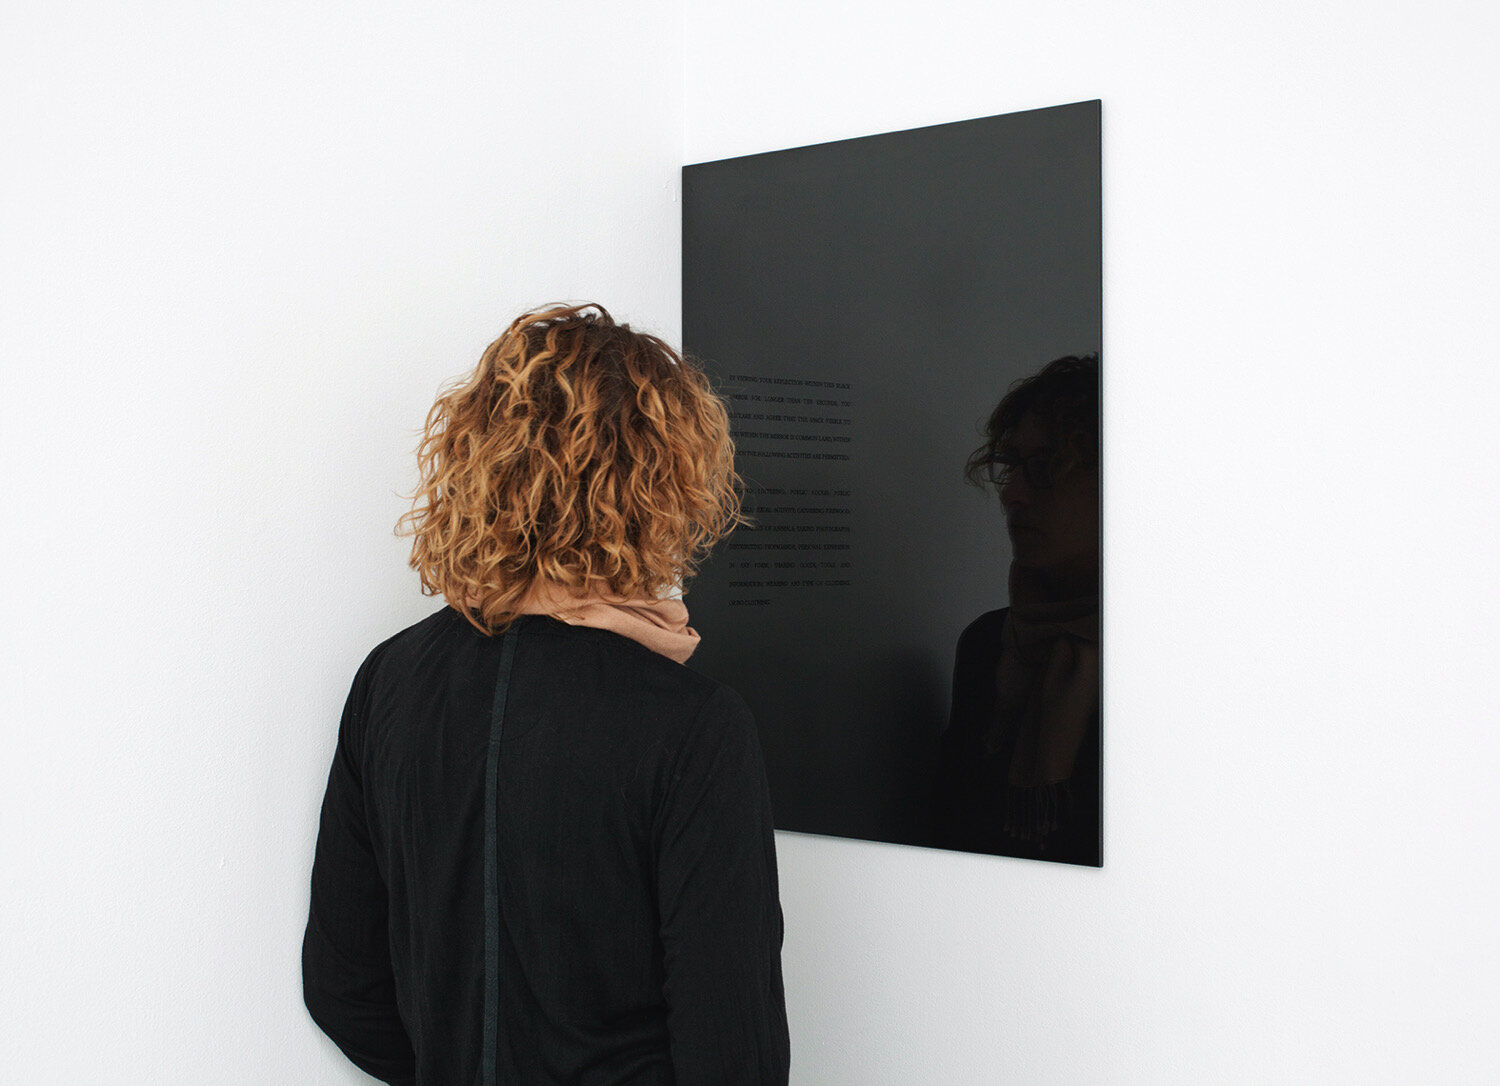 'Obsidian Contract', 2010